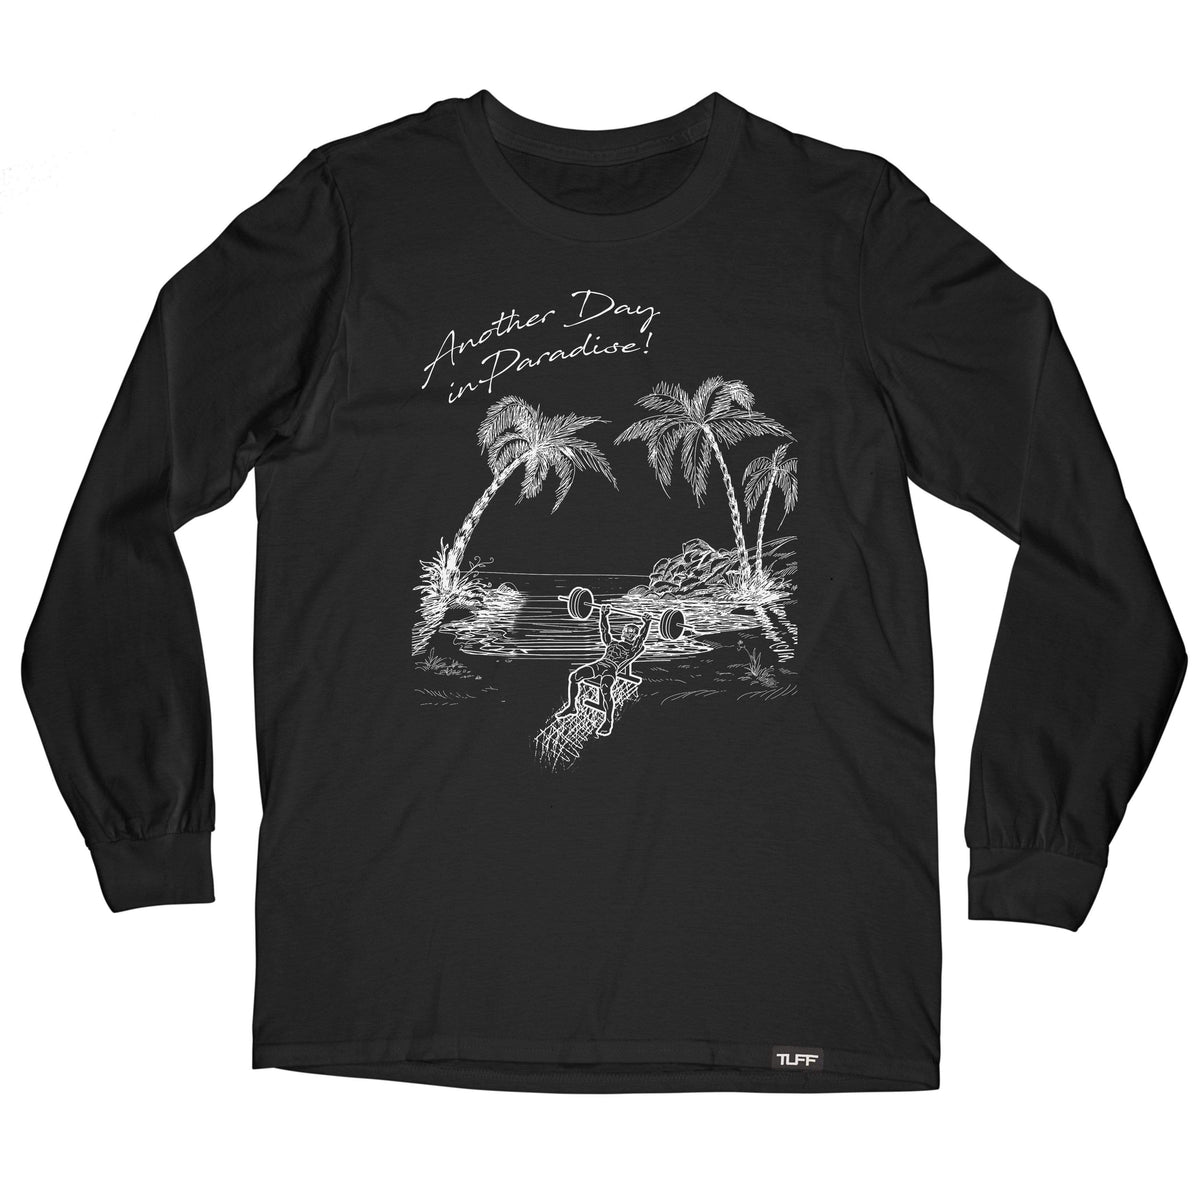 Another Day in Paradise Long Sleeve Tee S / Black TuffWraps.com